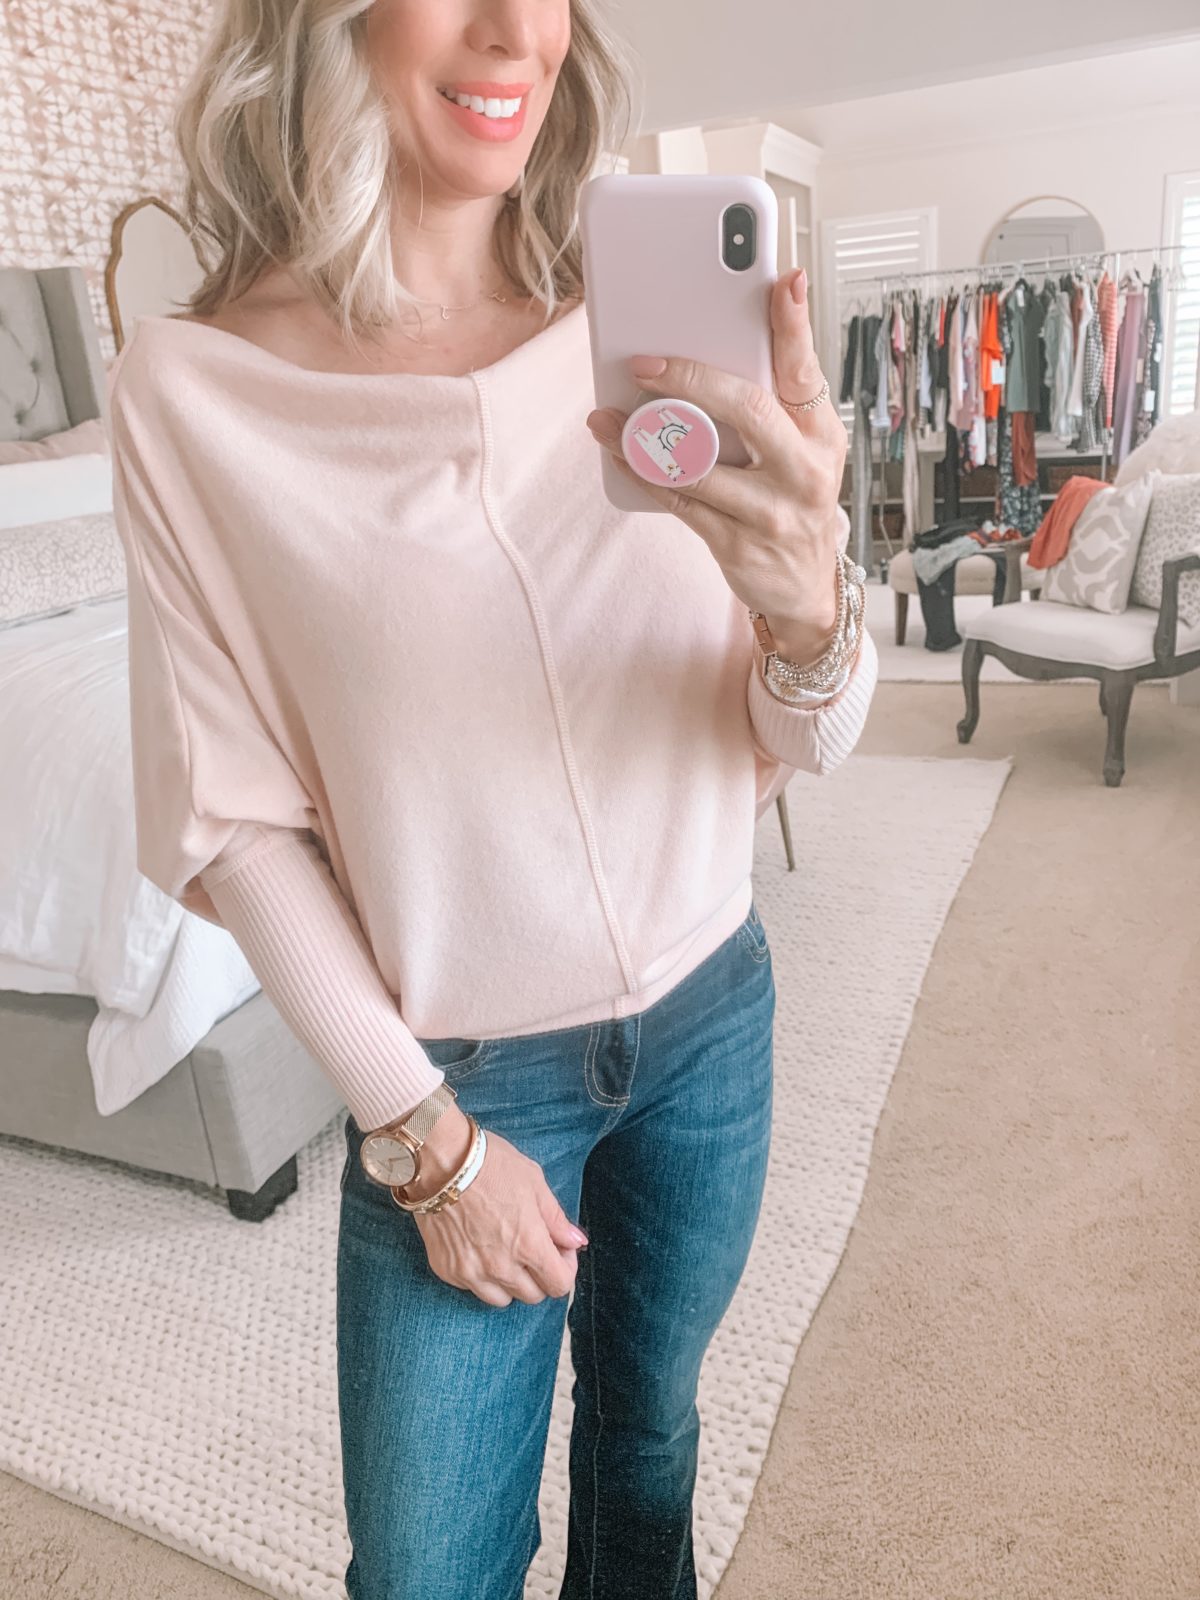 Dressing Room Finds Nordstrom and LOFT, Slouchy Long Sleeve Sweater, BootCut Jeans